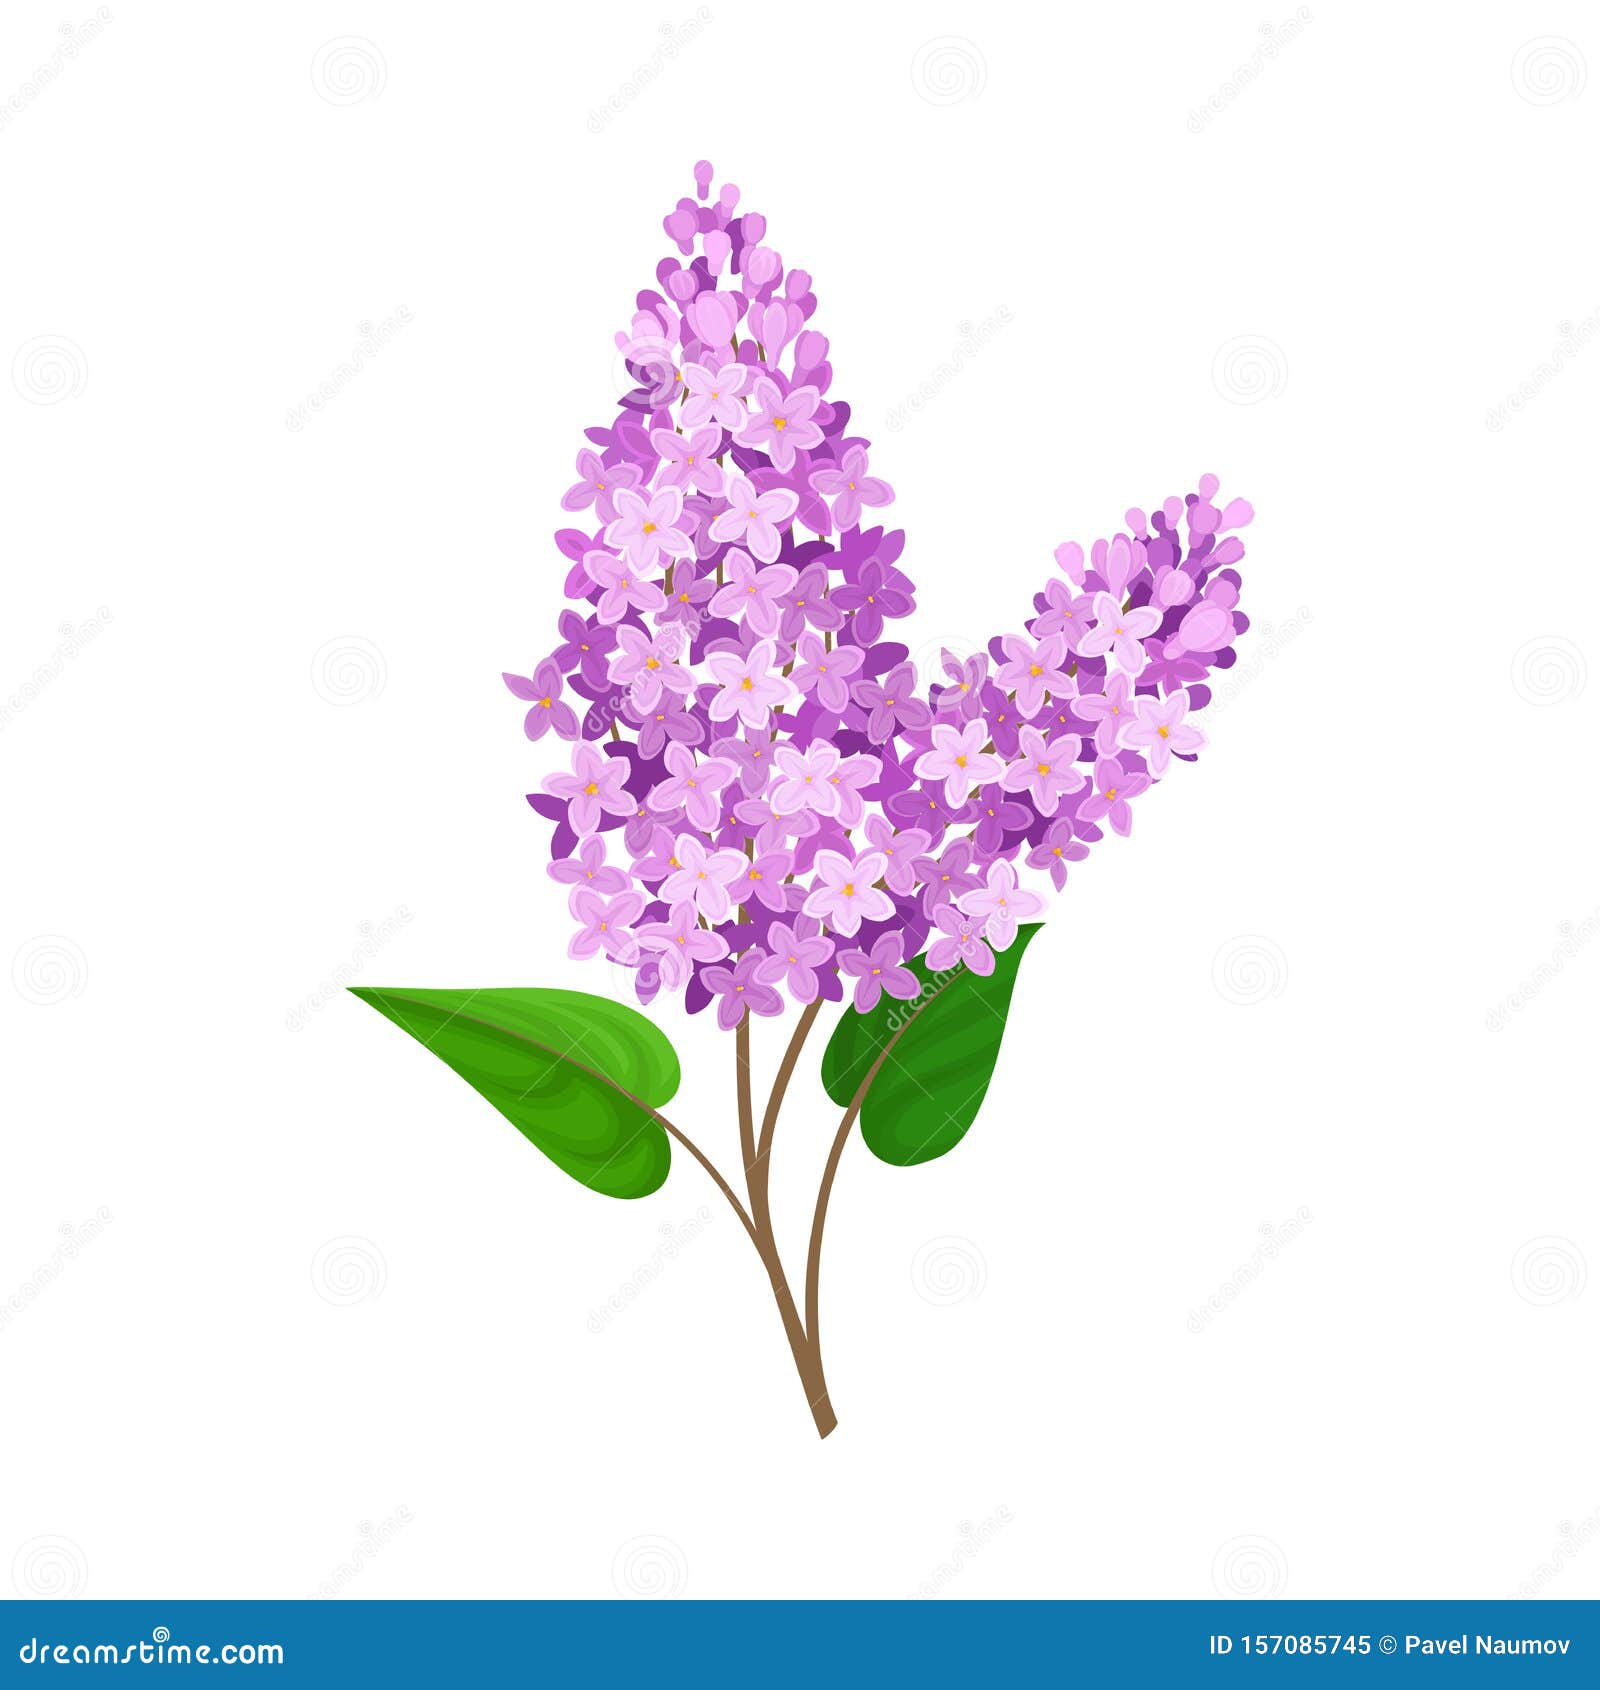 Lush Branch Light Purple Lilac. Vector Illustration on a White ...